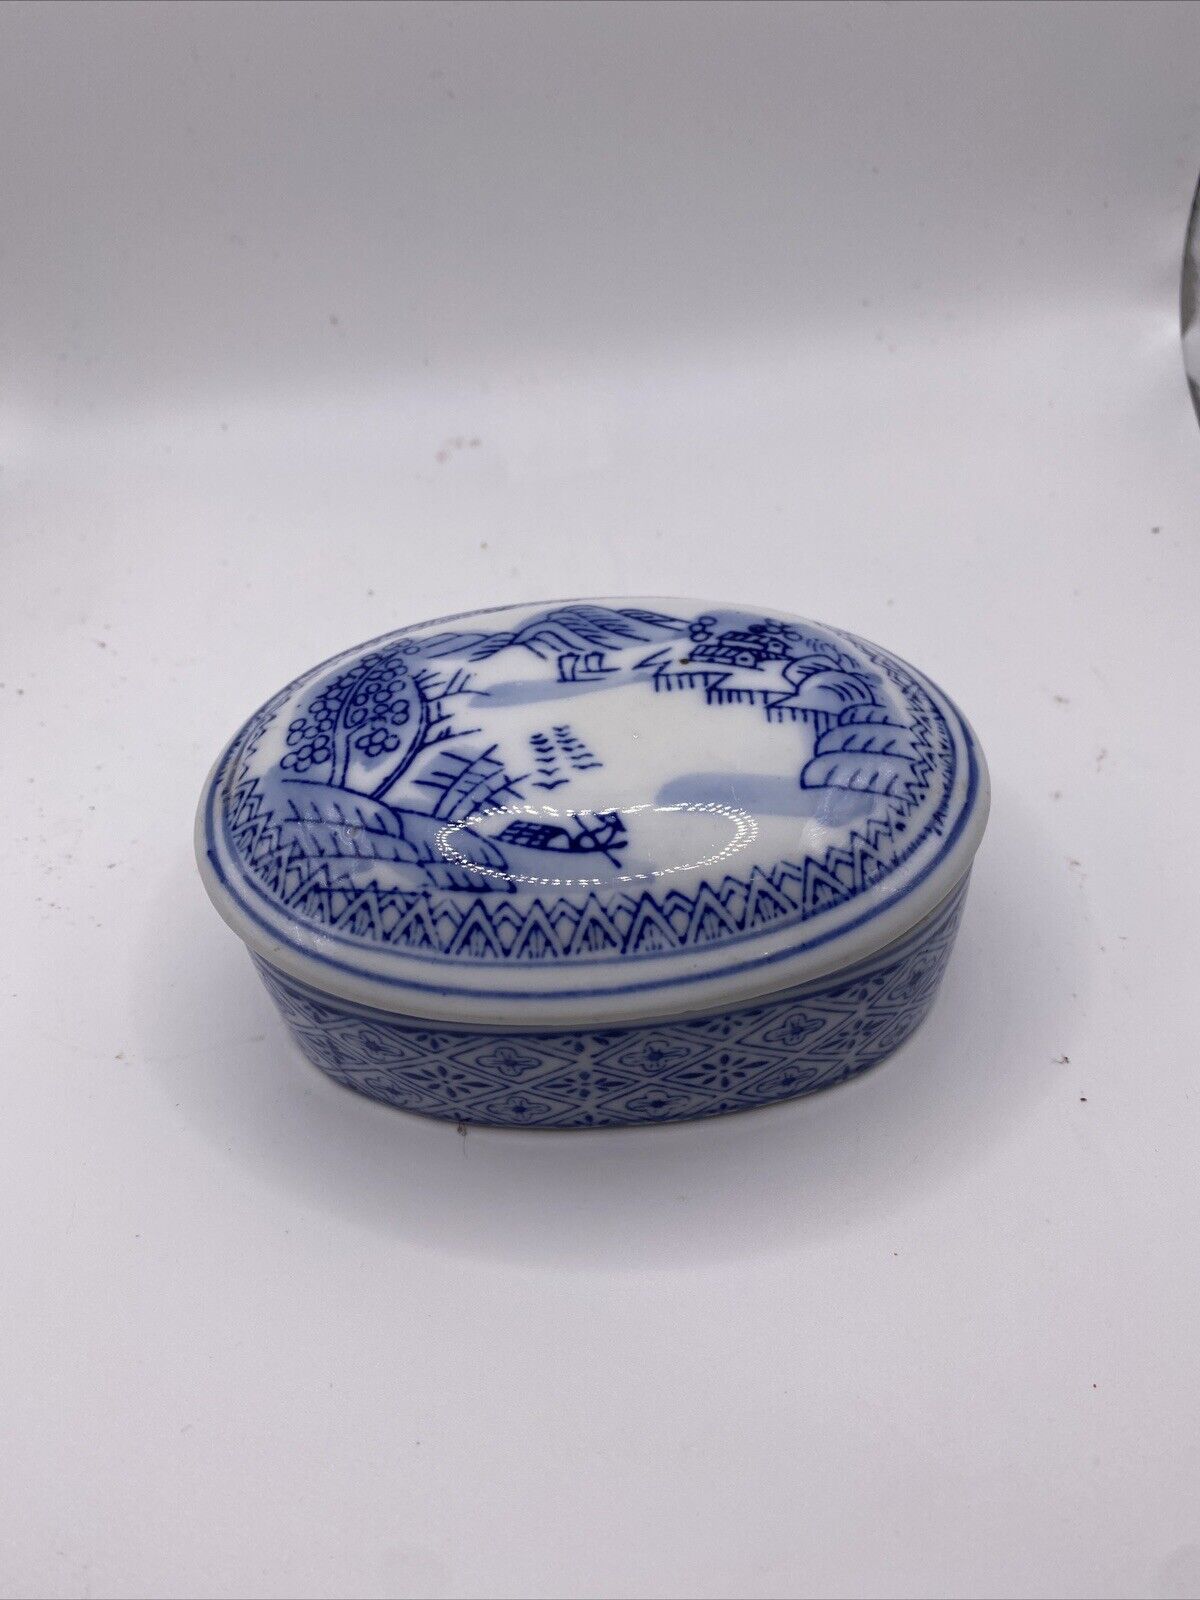 vintage asian porcelain blue white trinket box from China mountains oval lidded 